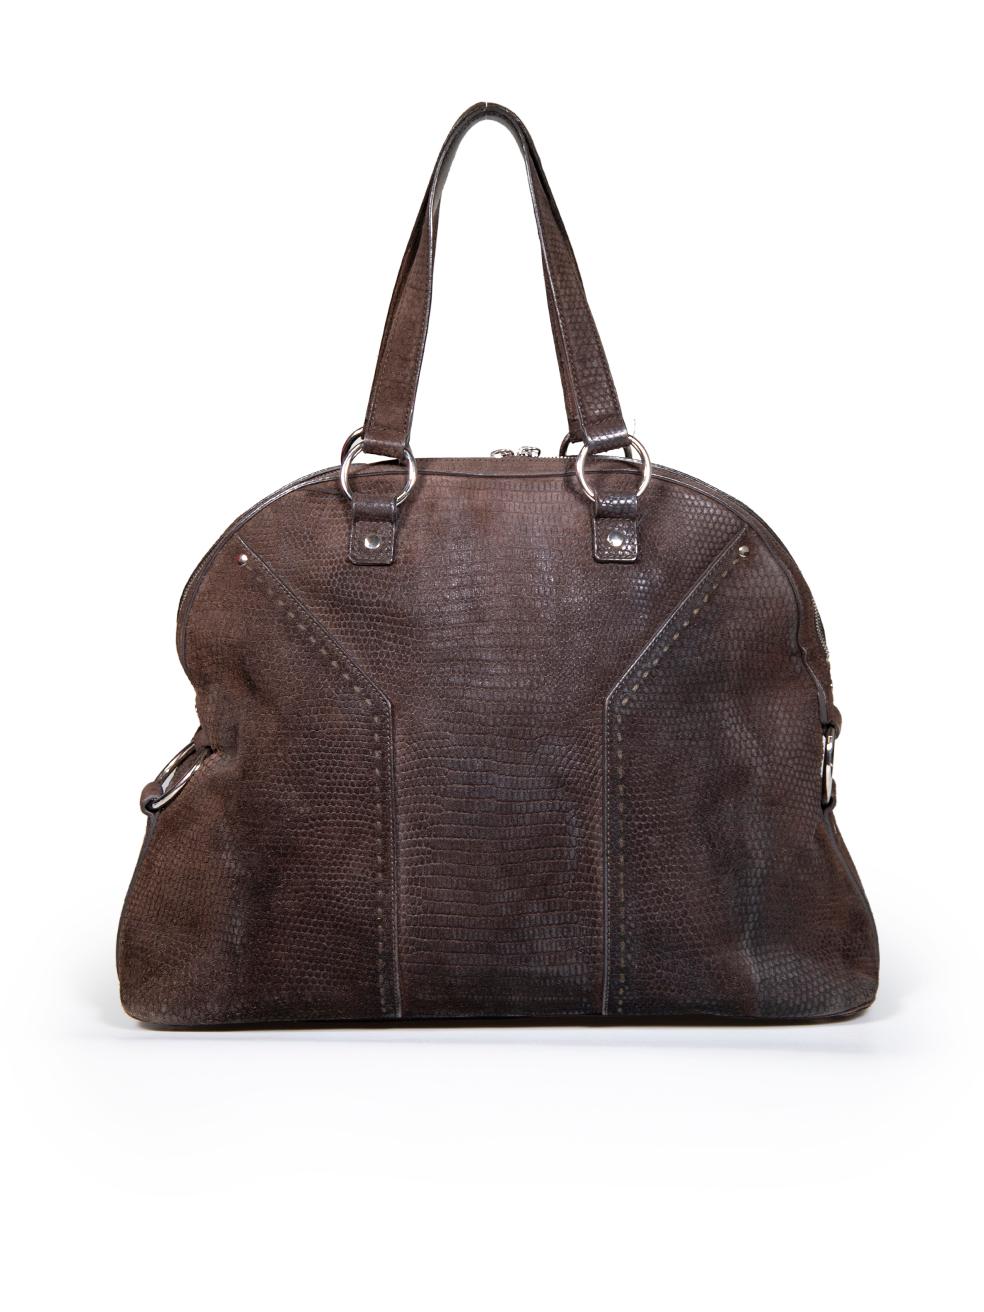 Saint Laurent Saint Laurent rive gauche Brown Suede Lizard Embossed Muse Bag In Good Condition For Sale In London, GB